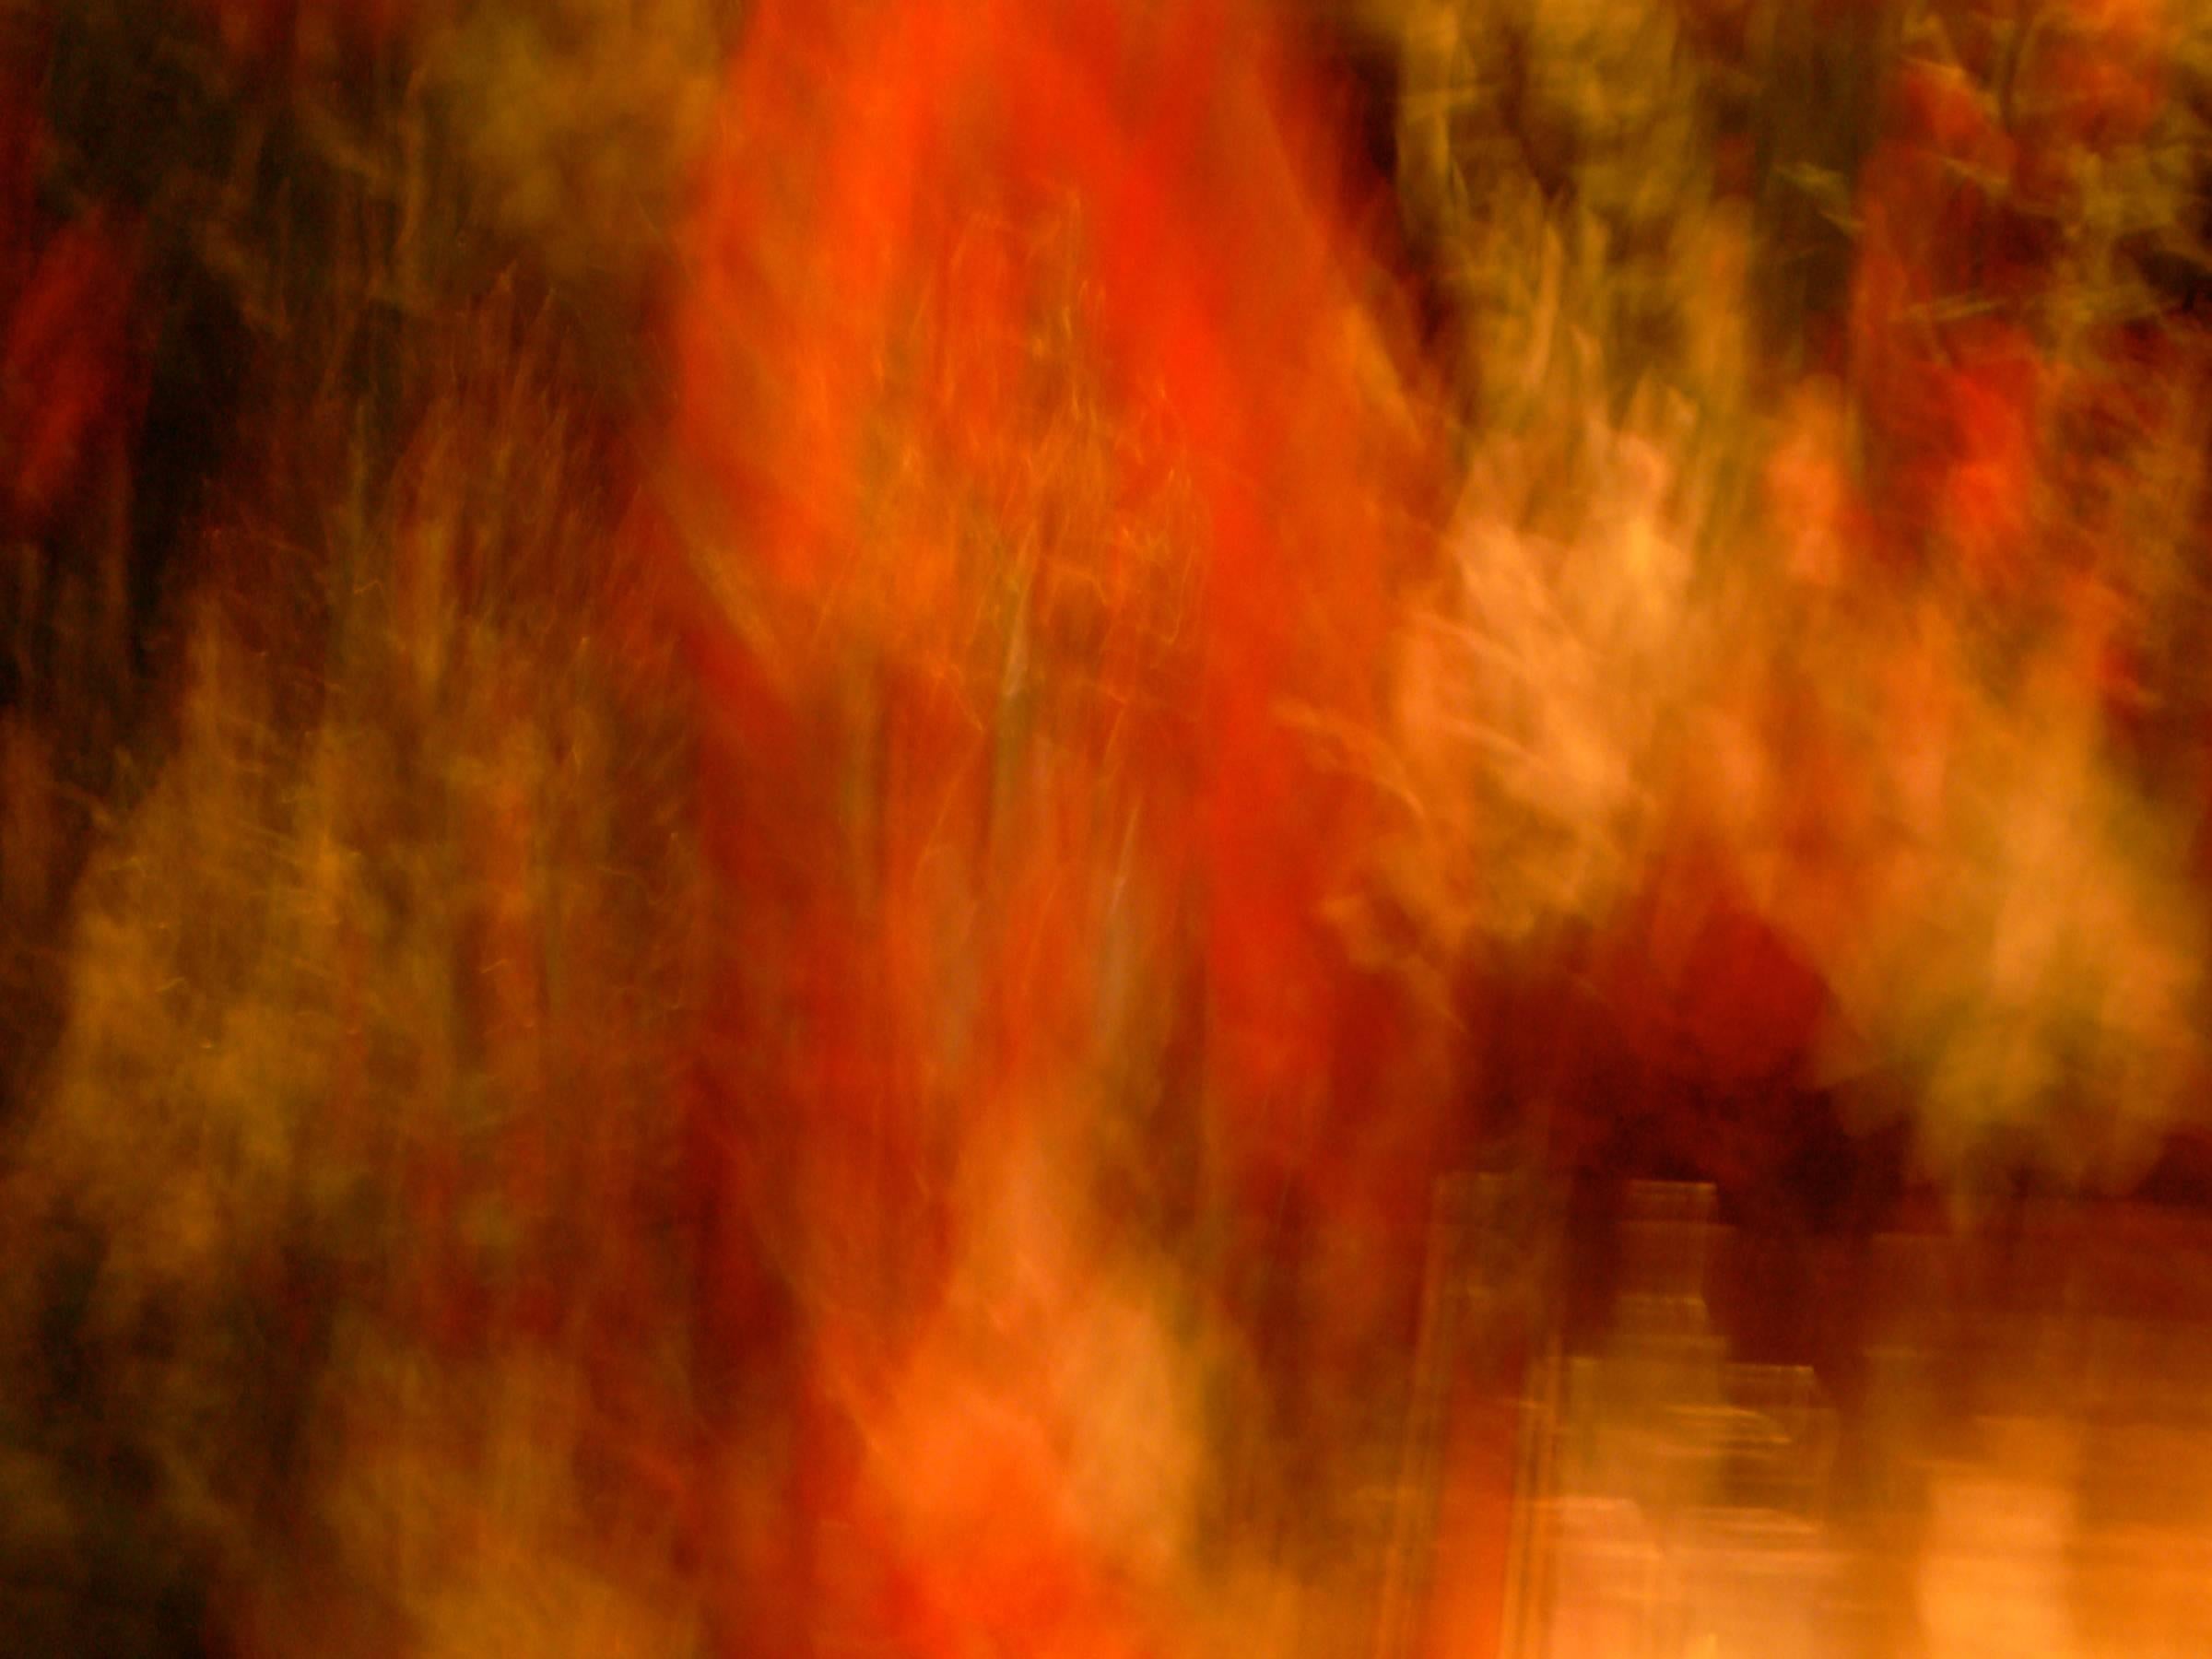 John Perkins Abstract Photograph - Landscapes of Perception 8, abstract colour photograph